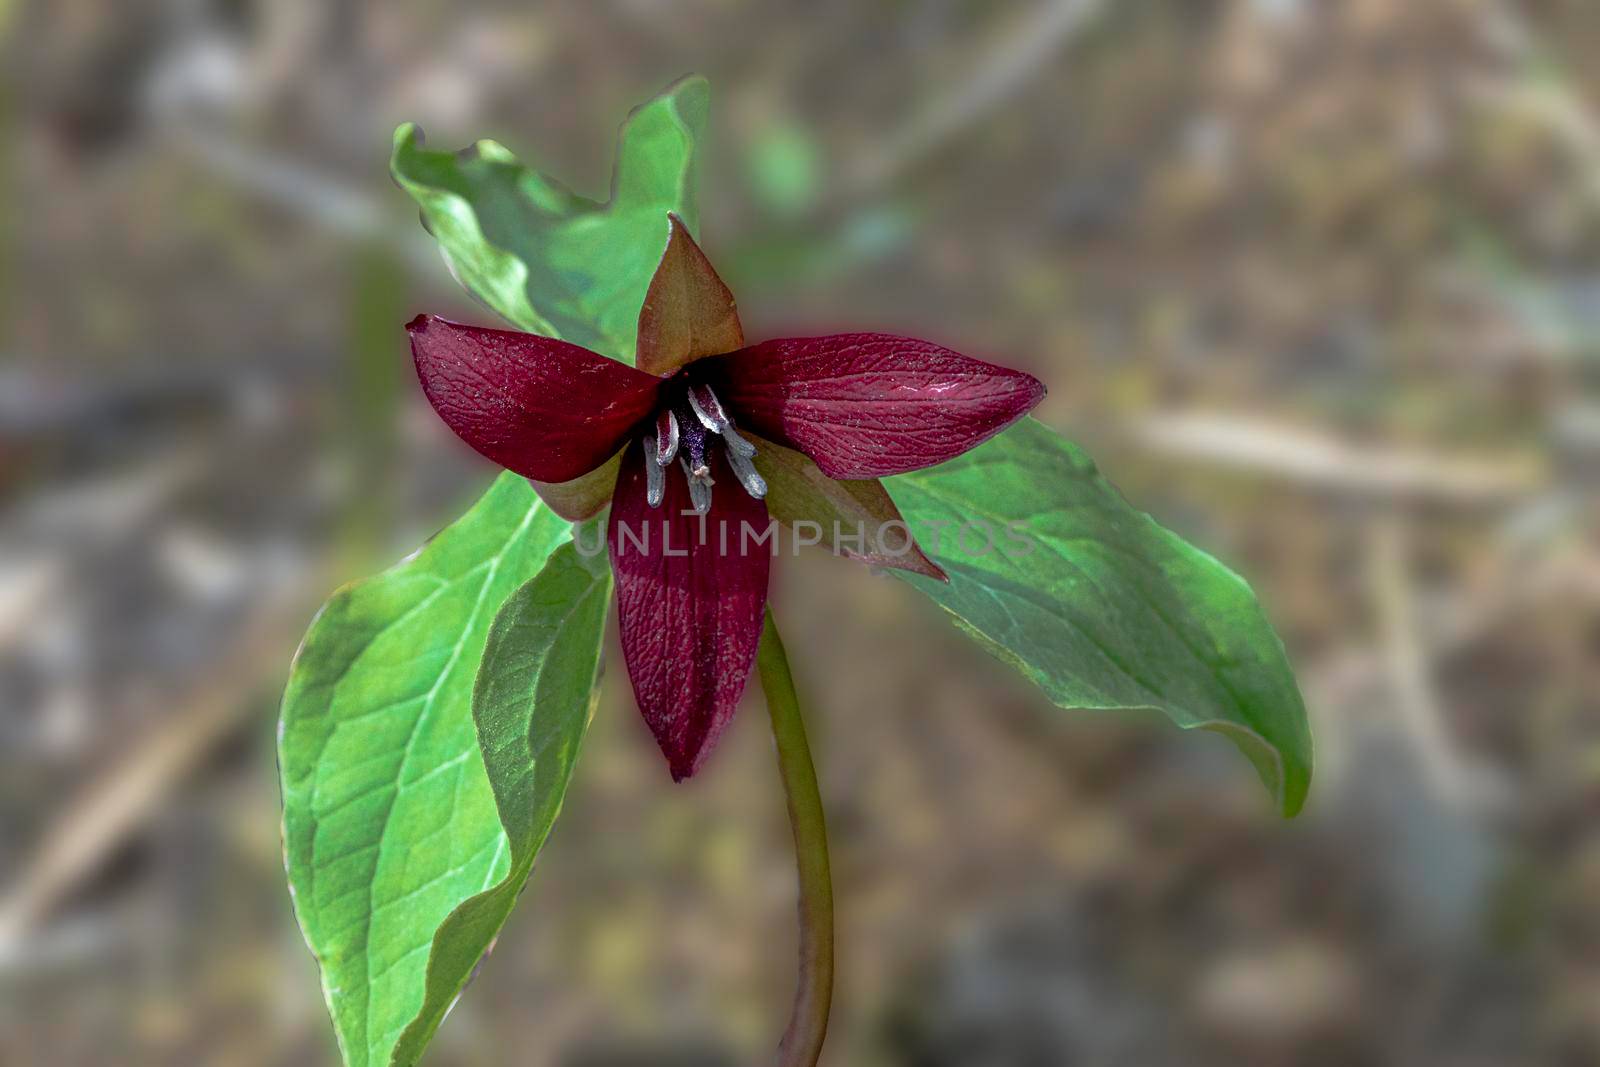 The burgundy and white Trillium flowers are symbols of the province of Ontario